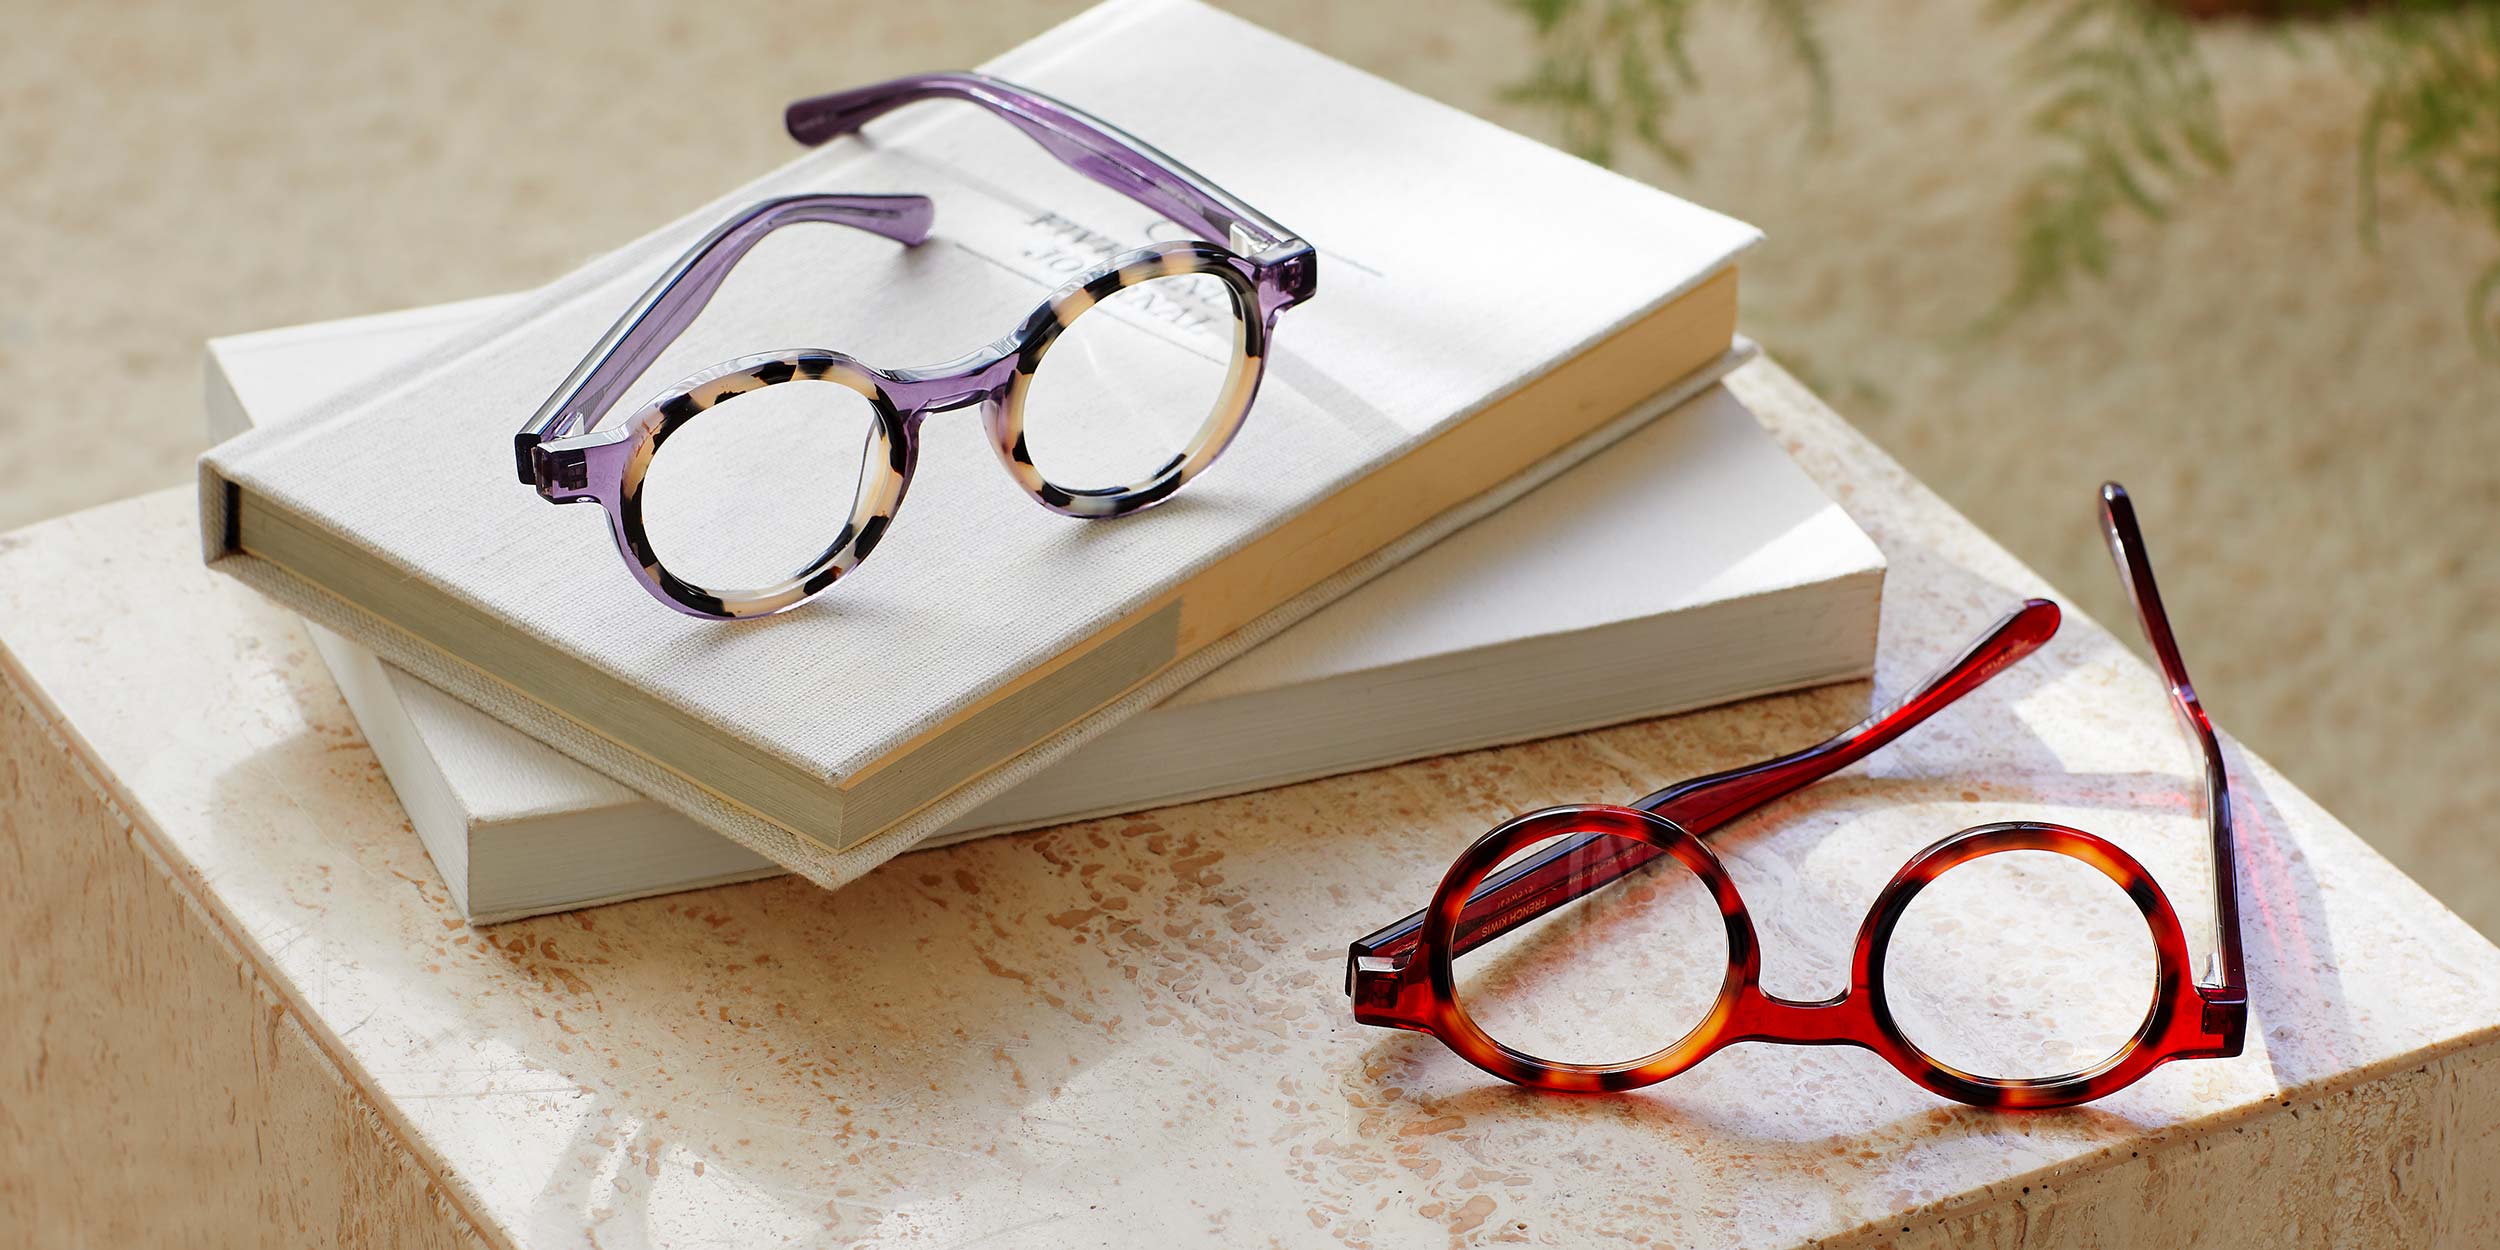 Photo Details of Loïs Mauve & Grey Tortoise Reading Glasses in a room